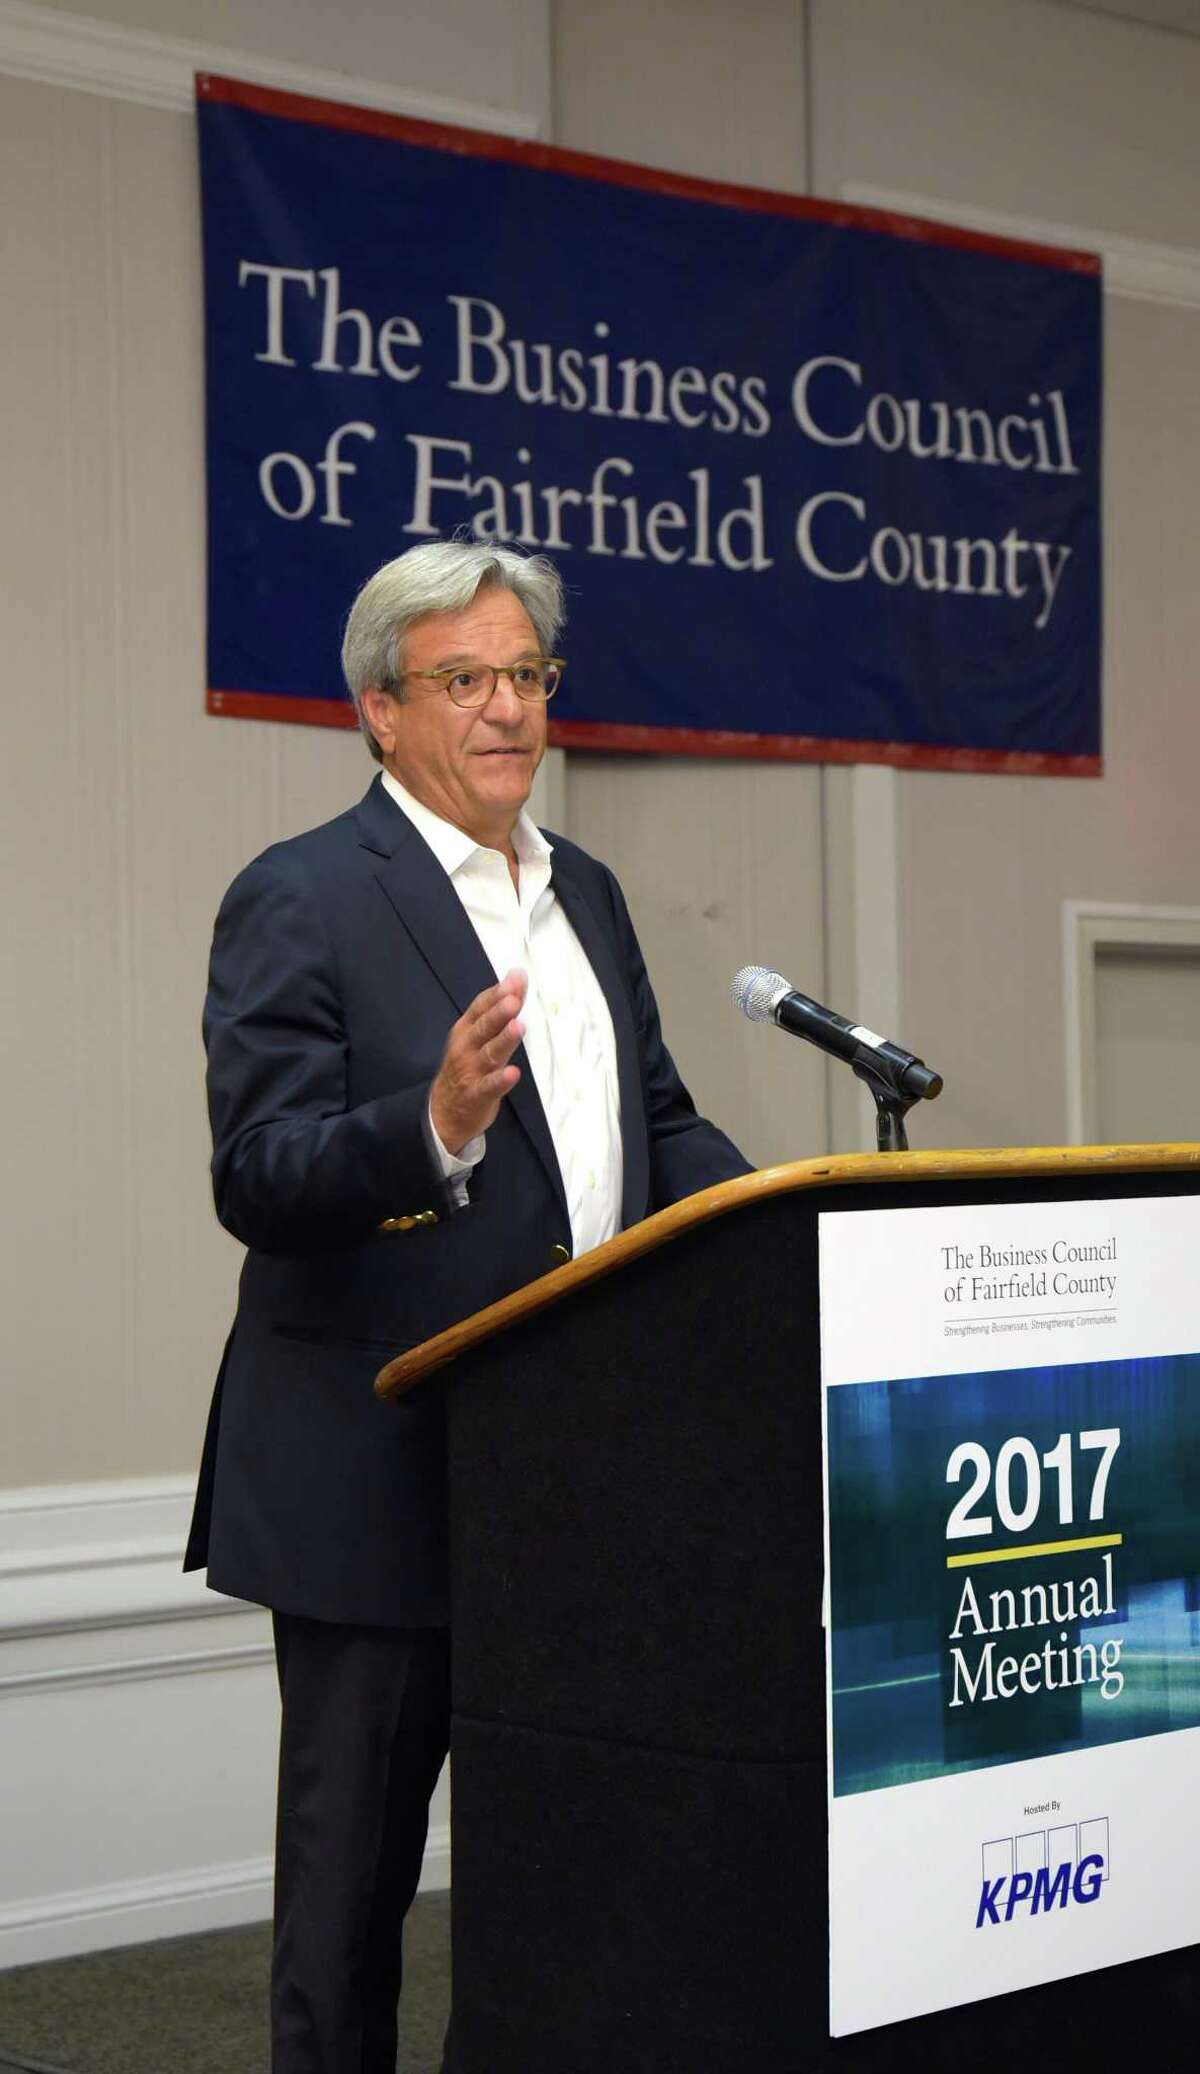 Forbes Media CEO and Executive Chairman Mike Perlis speaks at the Business Council of Fairfield County’s annual business meeting, on Tuesday, June 20, 2017, at the Crowne Plaza hotel, in Stamford, Conn.